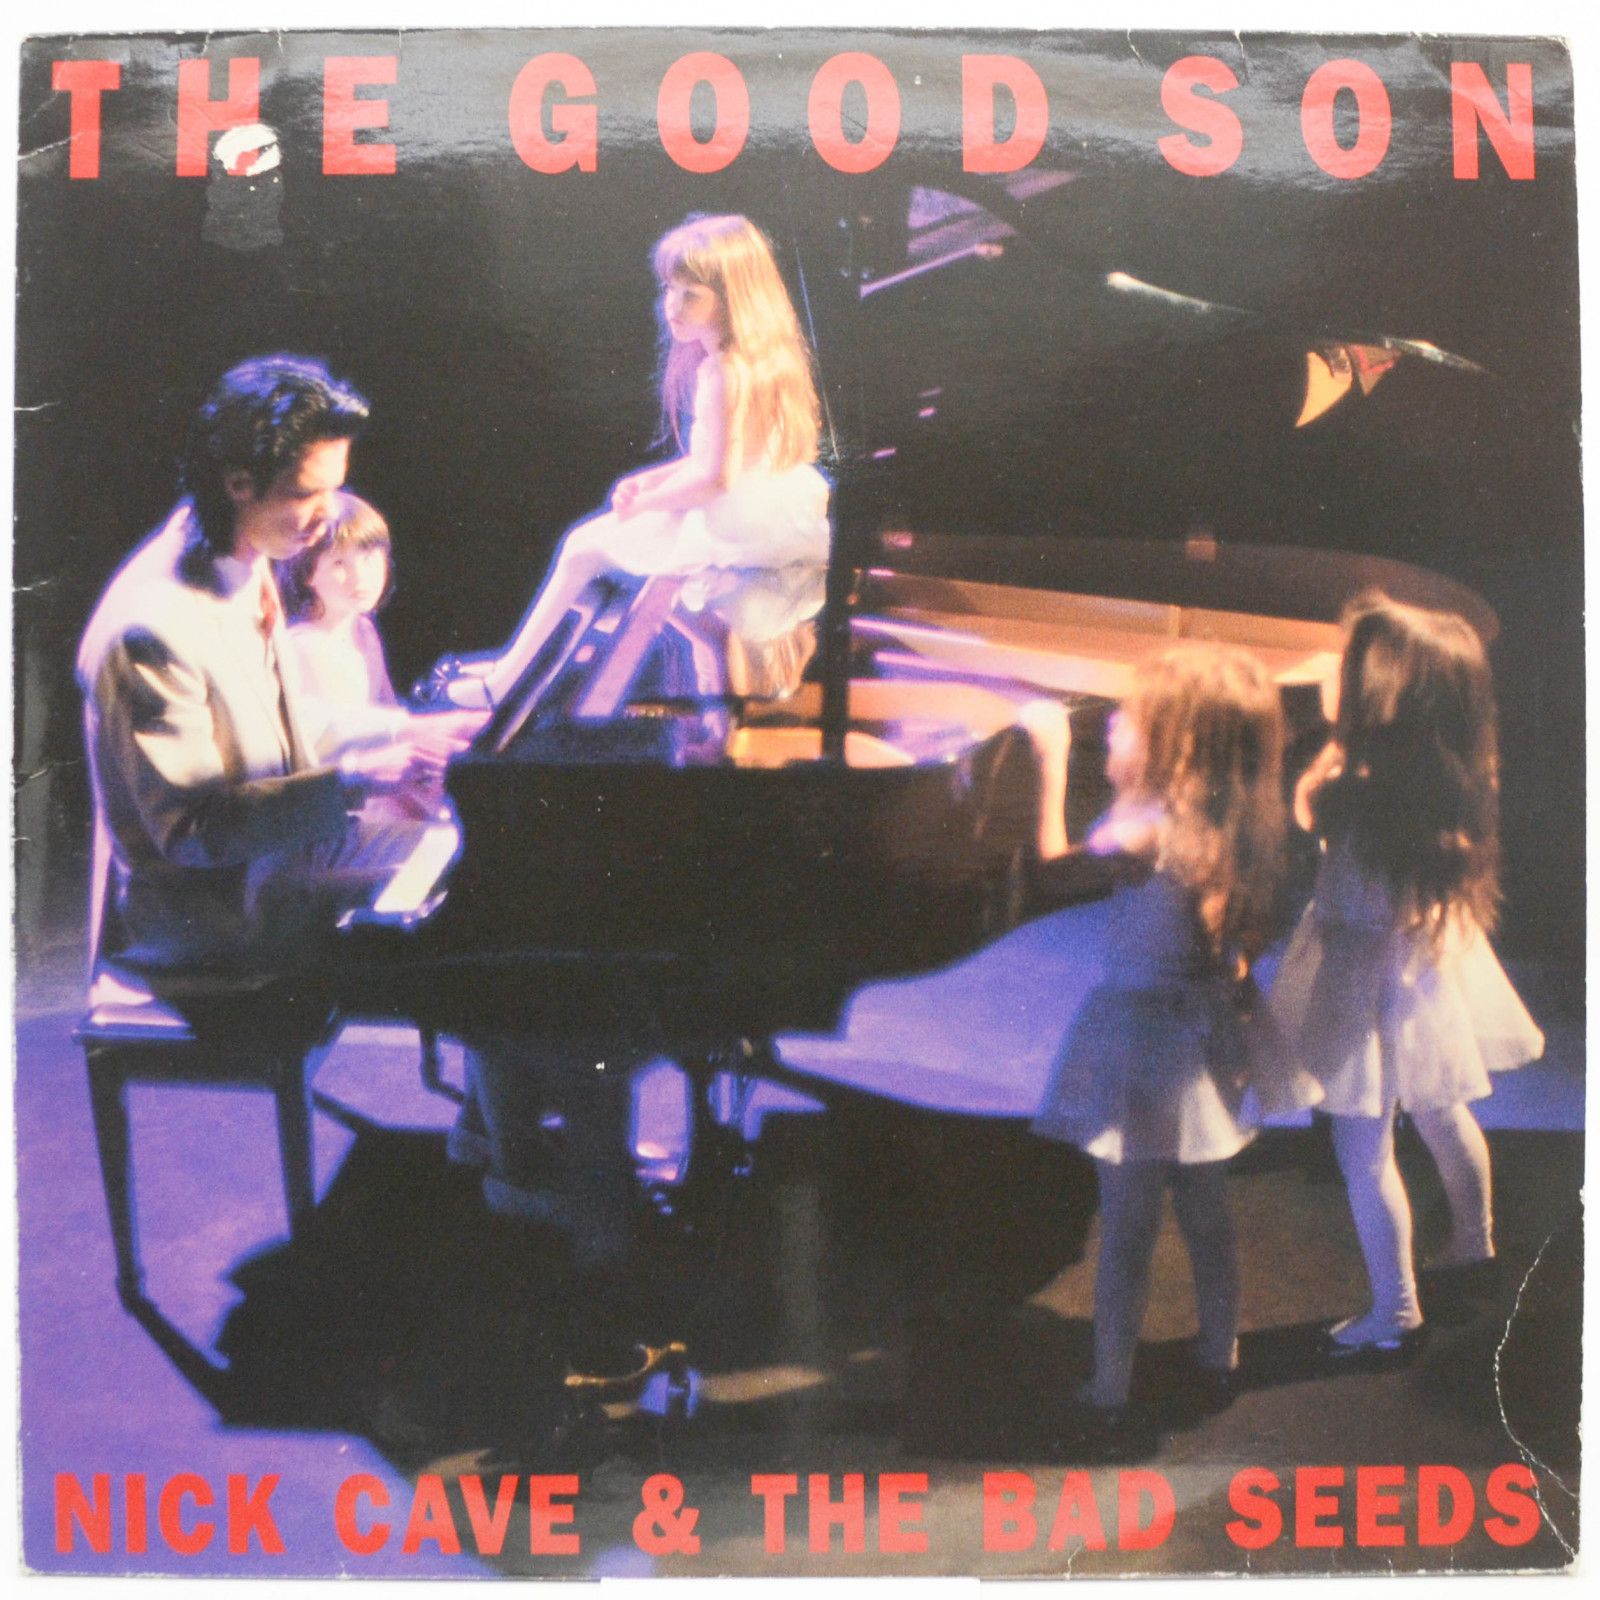 Nick Cave & The Bad Seeds — The Good Son, 1990